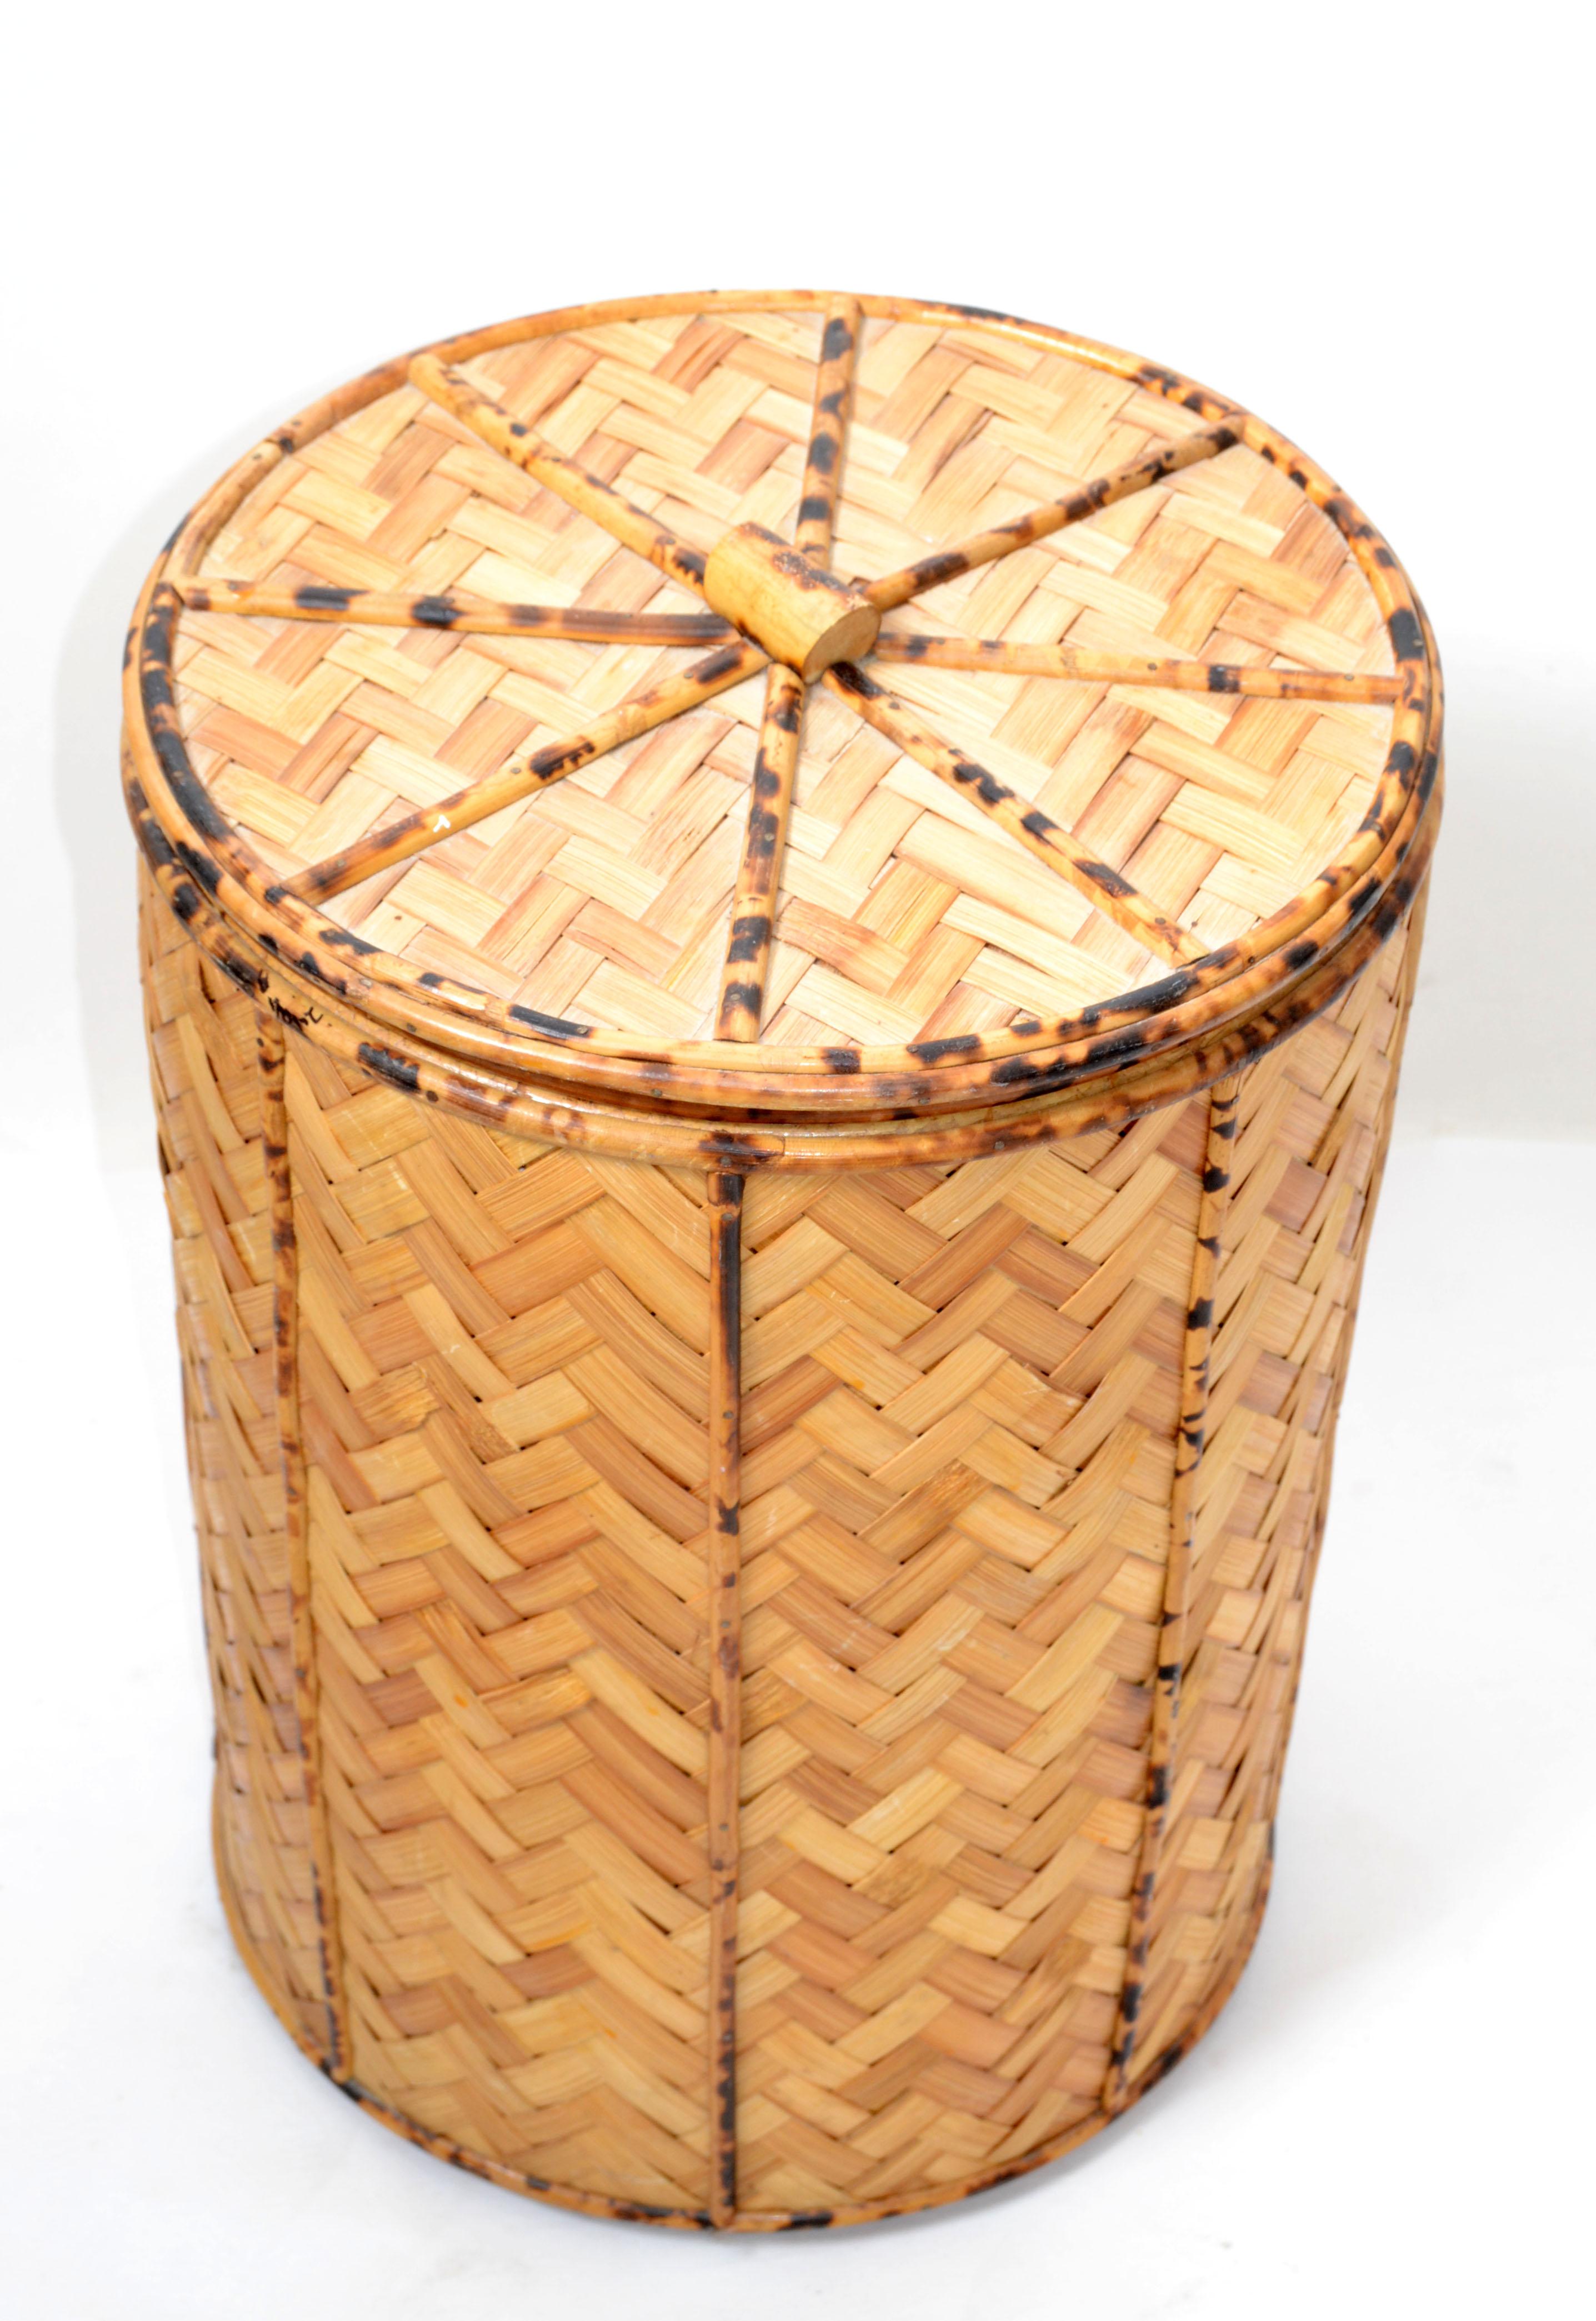 Vintage Chinese Export lidded round Basket handmade Bamboo and handwoven Rattan in blonde and black.
Made in Hong Kong and Exported in the 1970.
Can be used as Hamper, Magazine Stand or even drink table.
Labeled underneath.